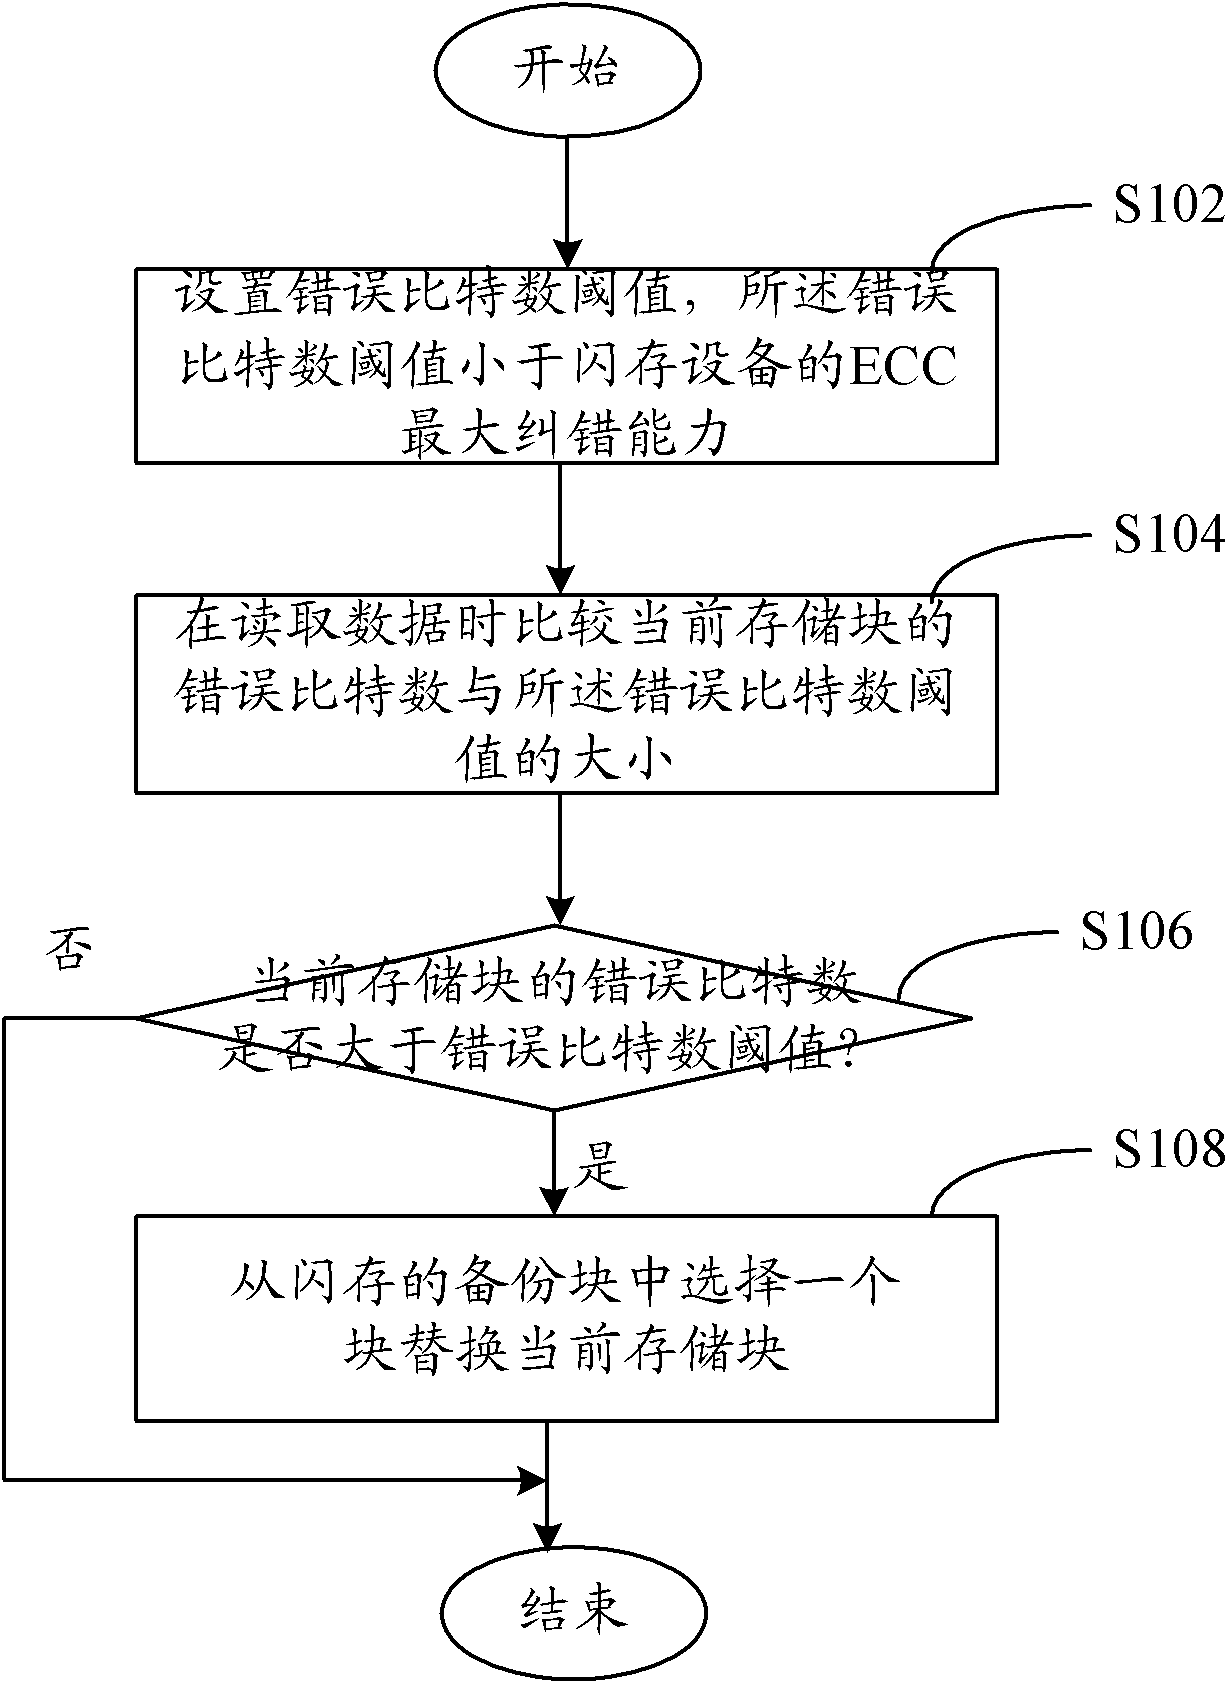 Flash memory equipment, and method and system for managing storage blocks in same